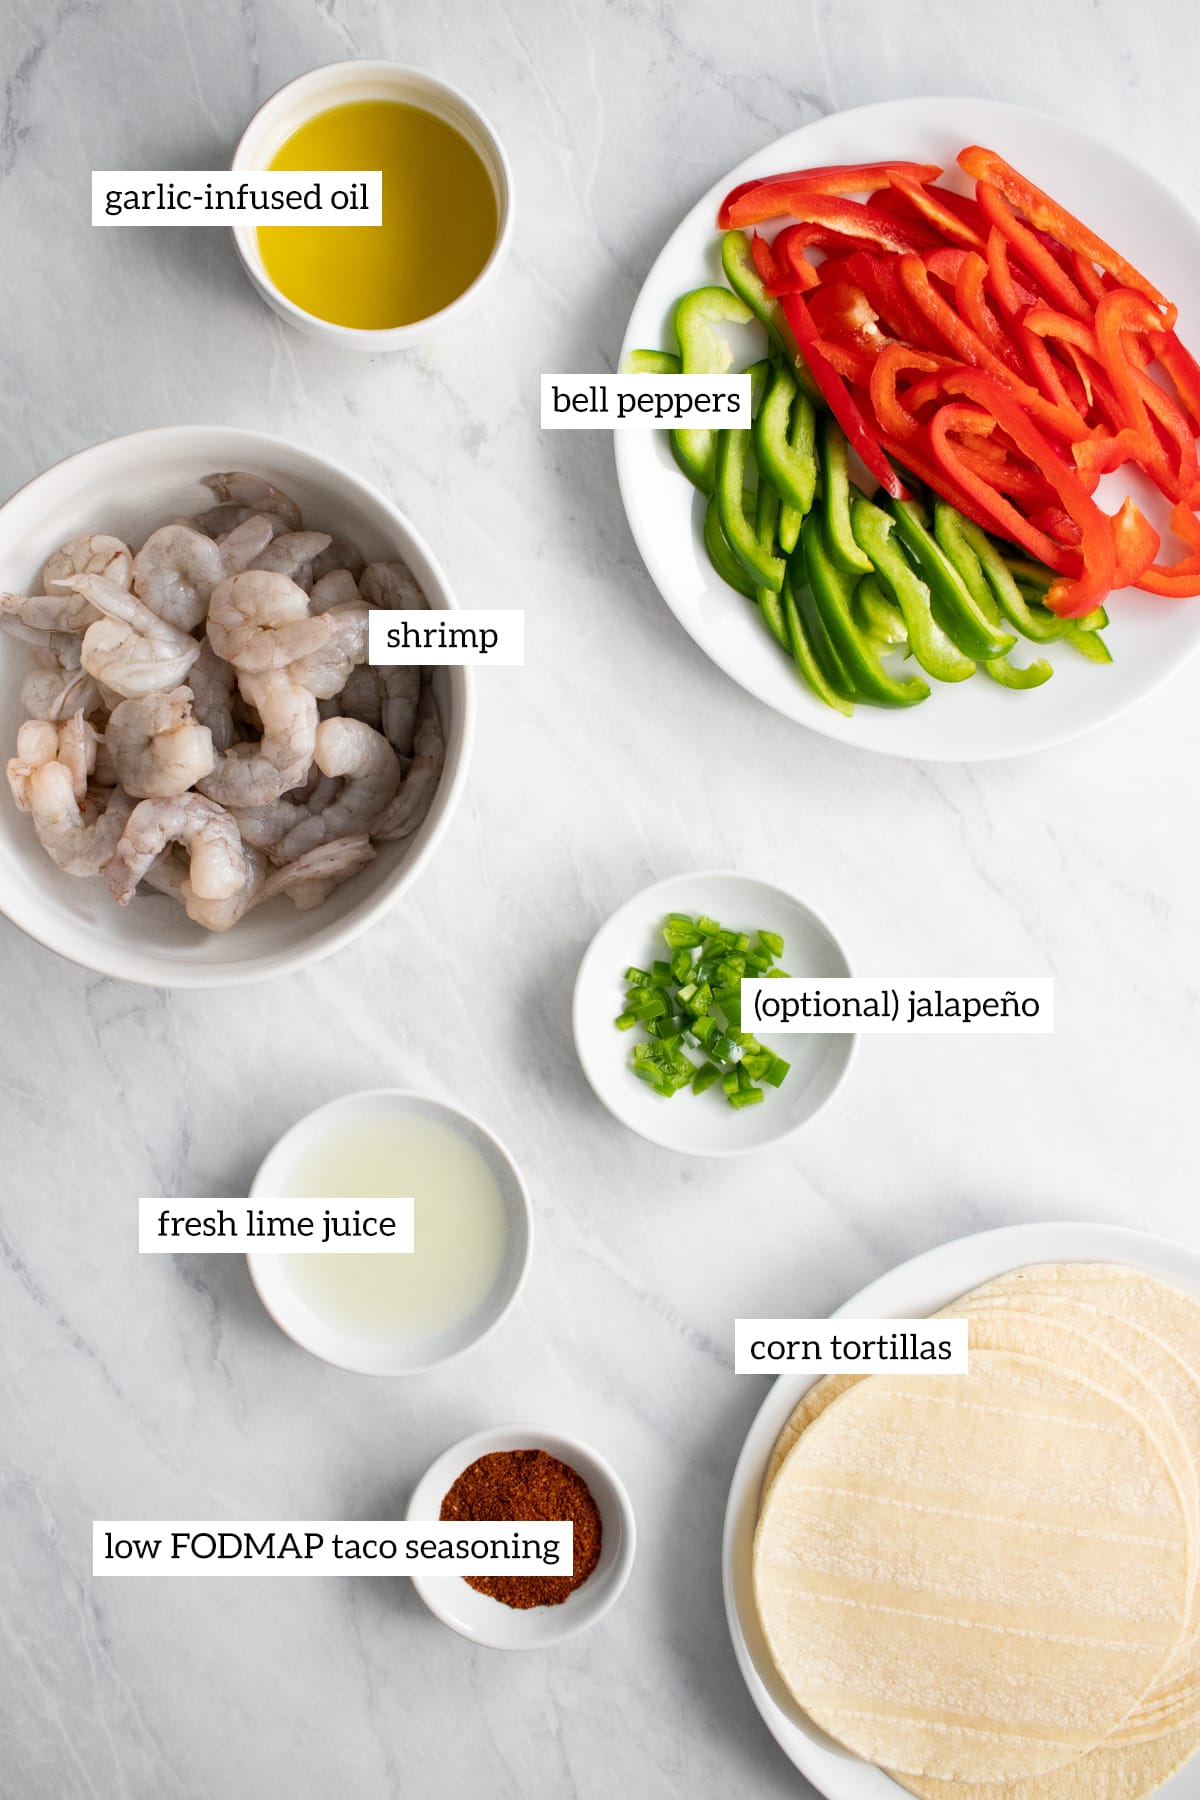 Ingredients needed for low FODMAP shrimp fajitas measured out into individual white dishes.